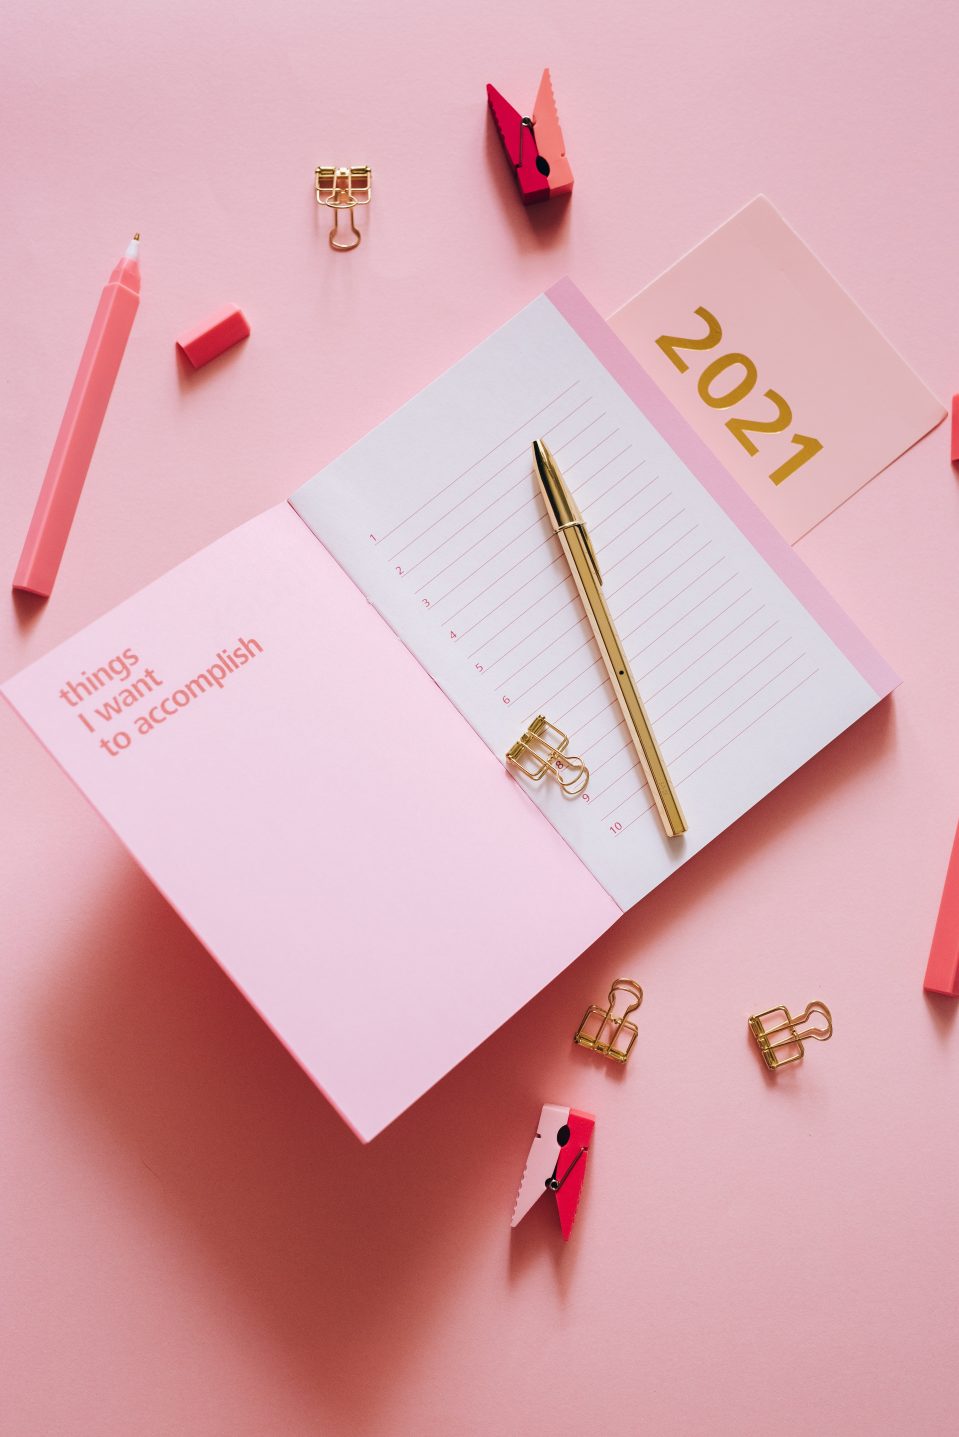 Pink flat lay with 2021 diary open on a page that says 'Things I want To Accomplish'